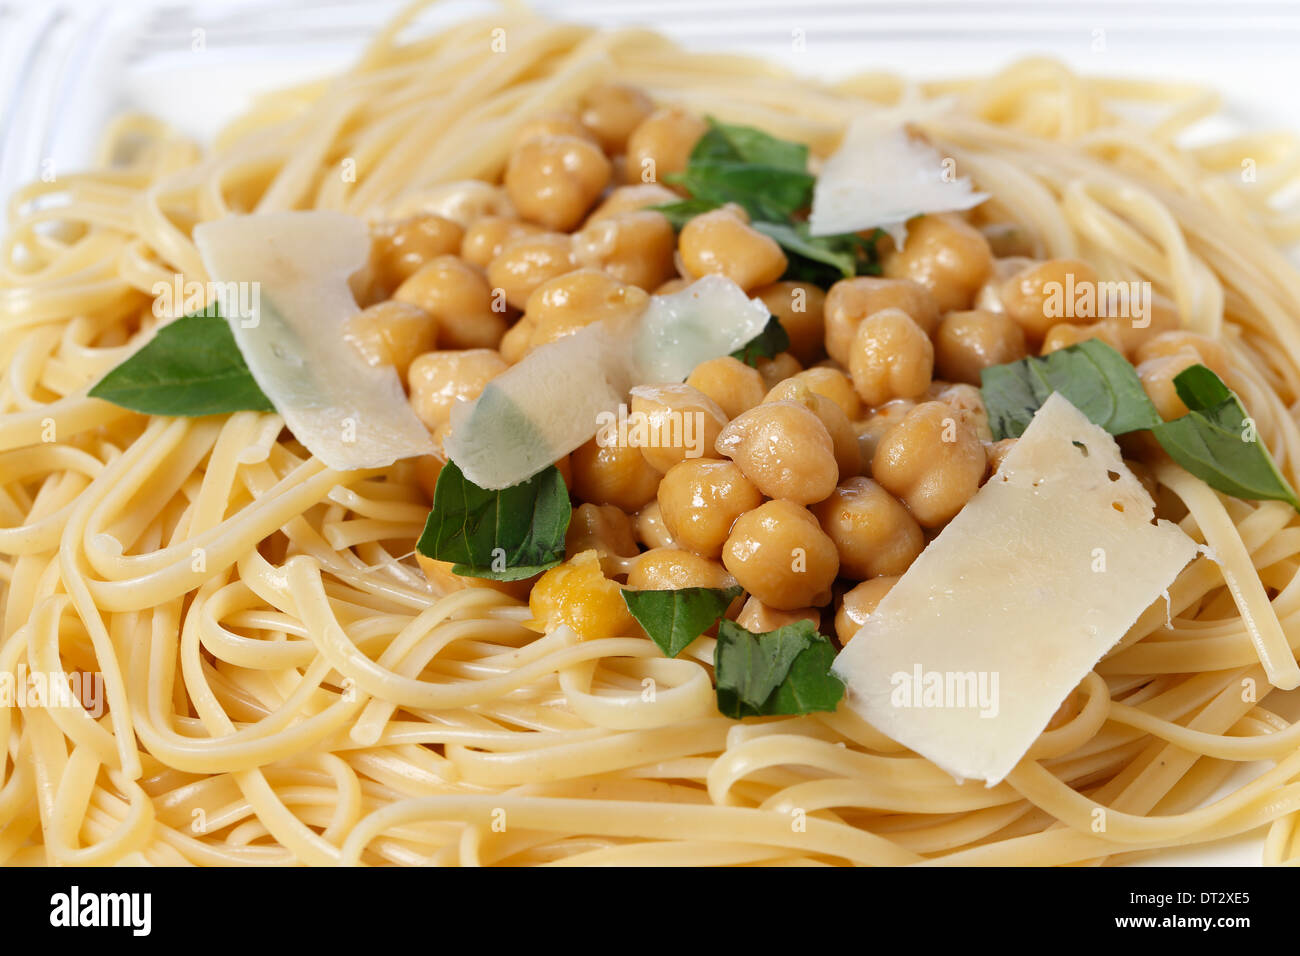 Bavette pasta (like linguine)  with a chickpea, garlic, chili and parmesan sauce, and garnished with torn basil leaves Stock Photo